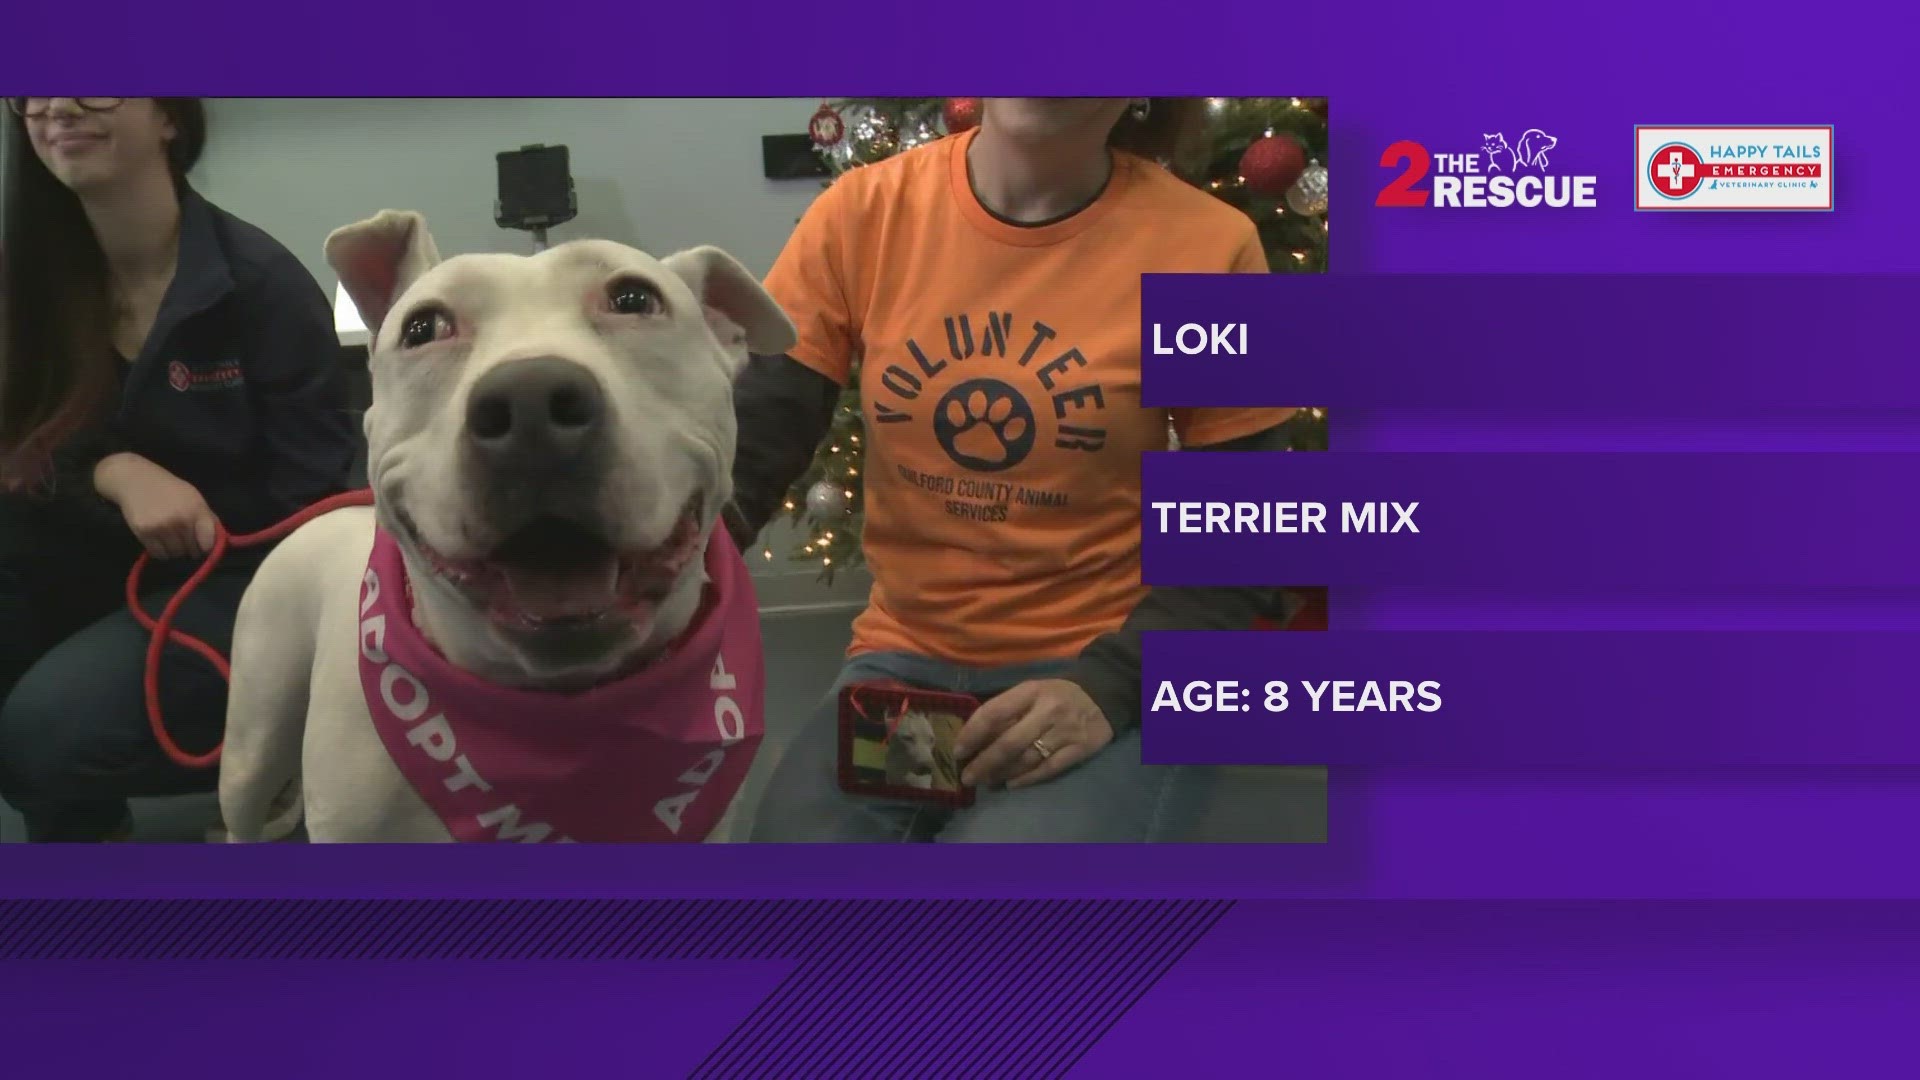 Loki is an eight-year-old terrier mix who is approximately 57 pounds. She loves to wiggle and accept treats. She is partially deaf but seems to do well with other do